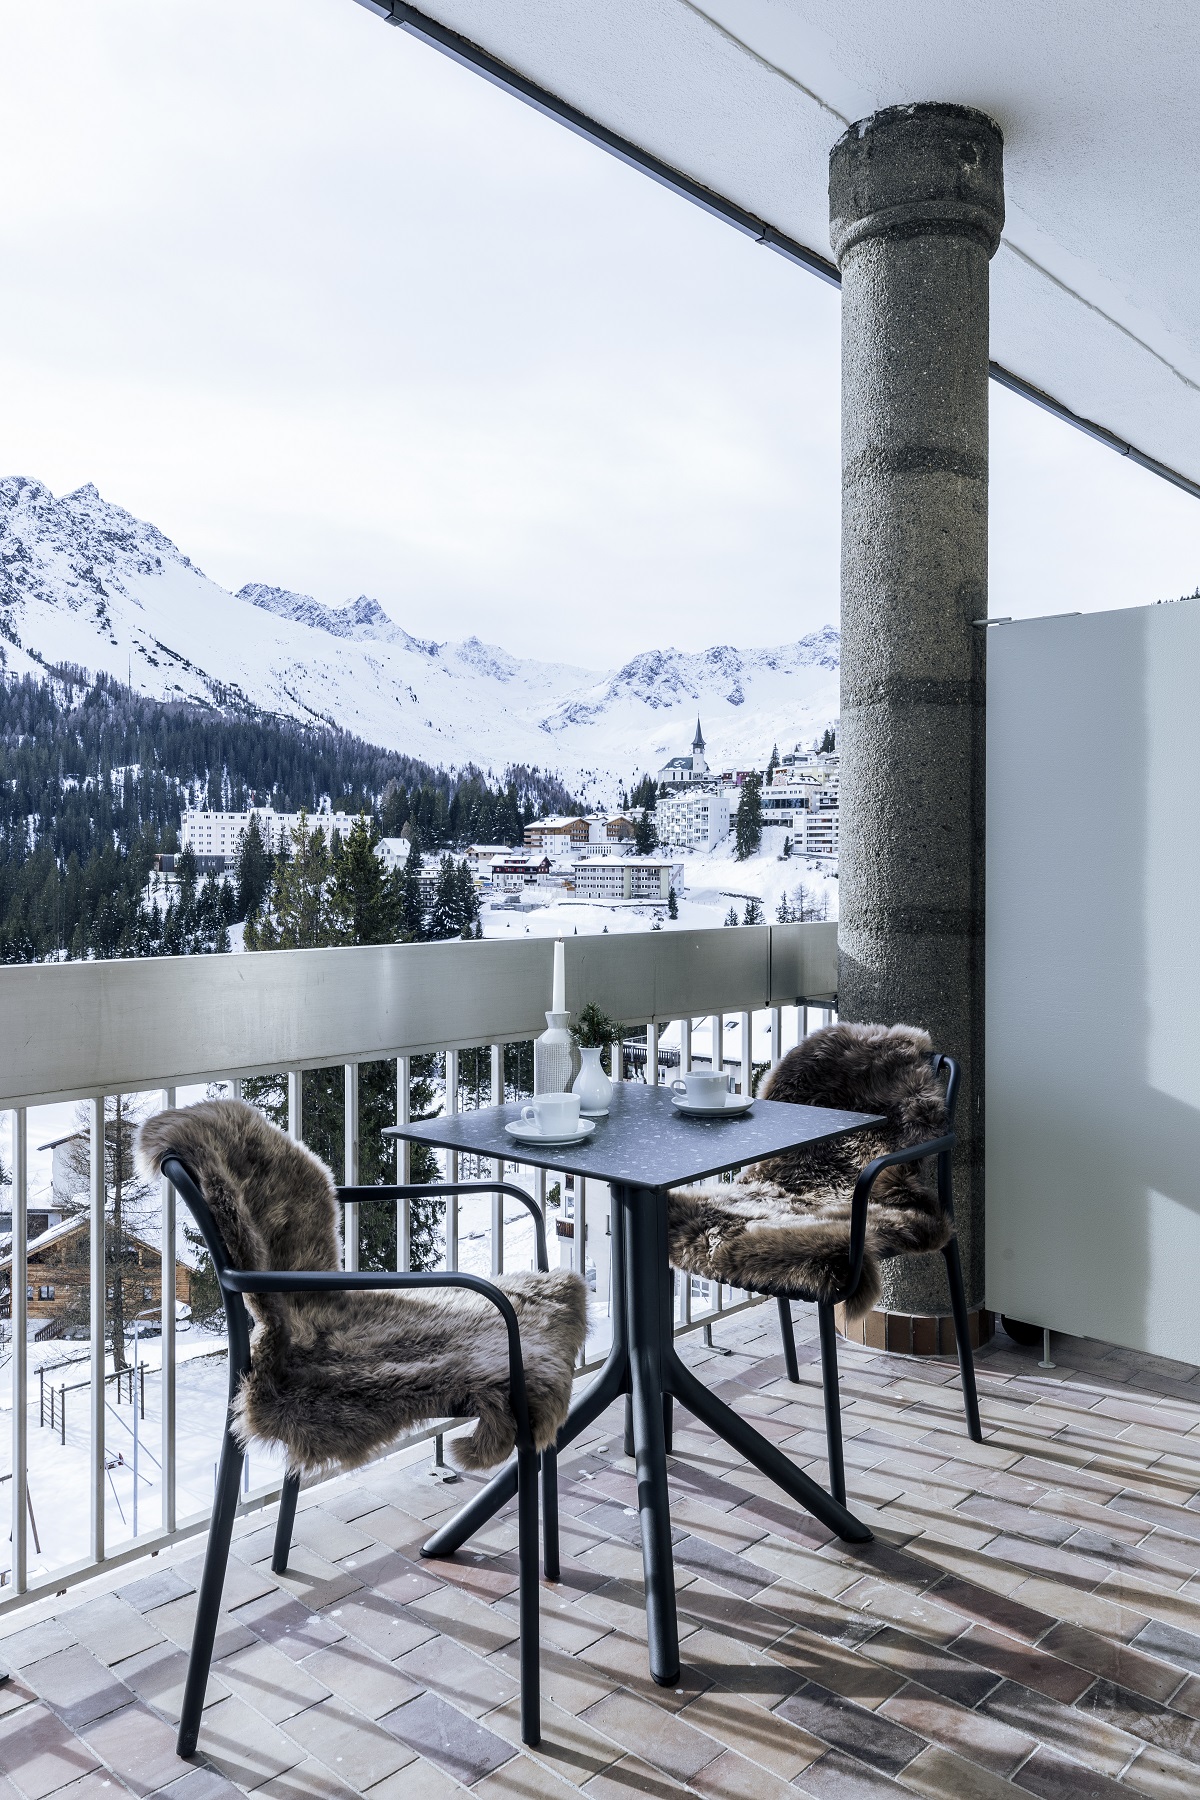 Faern Arosa guestroom balcony with chairs and mountain view